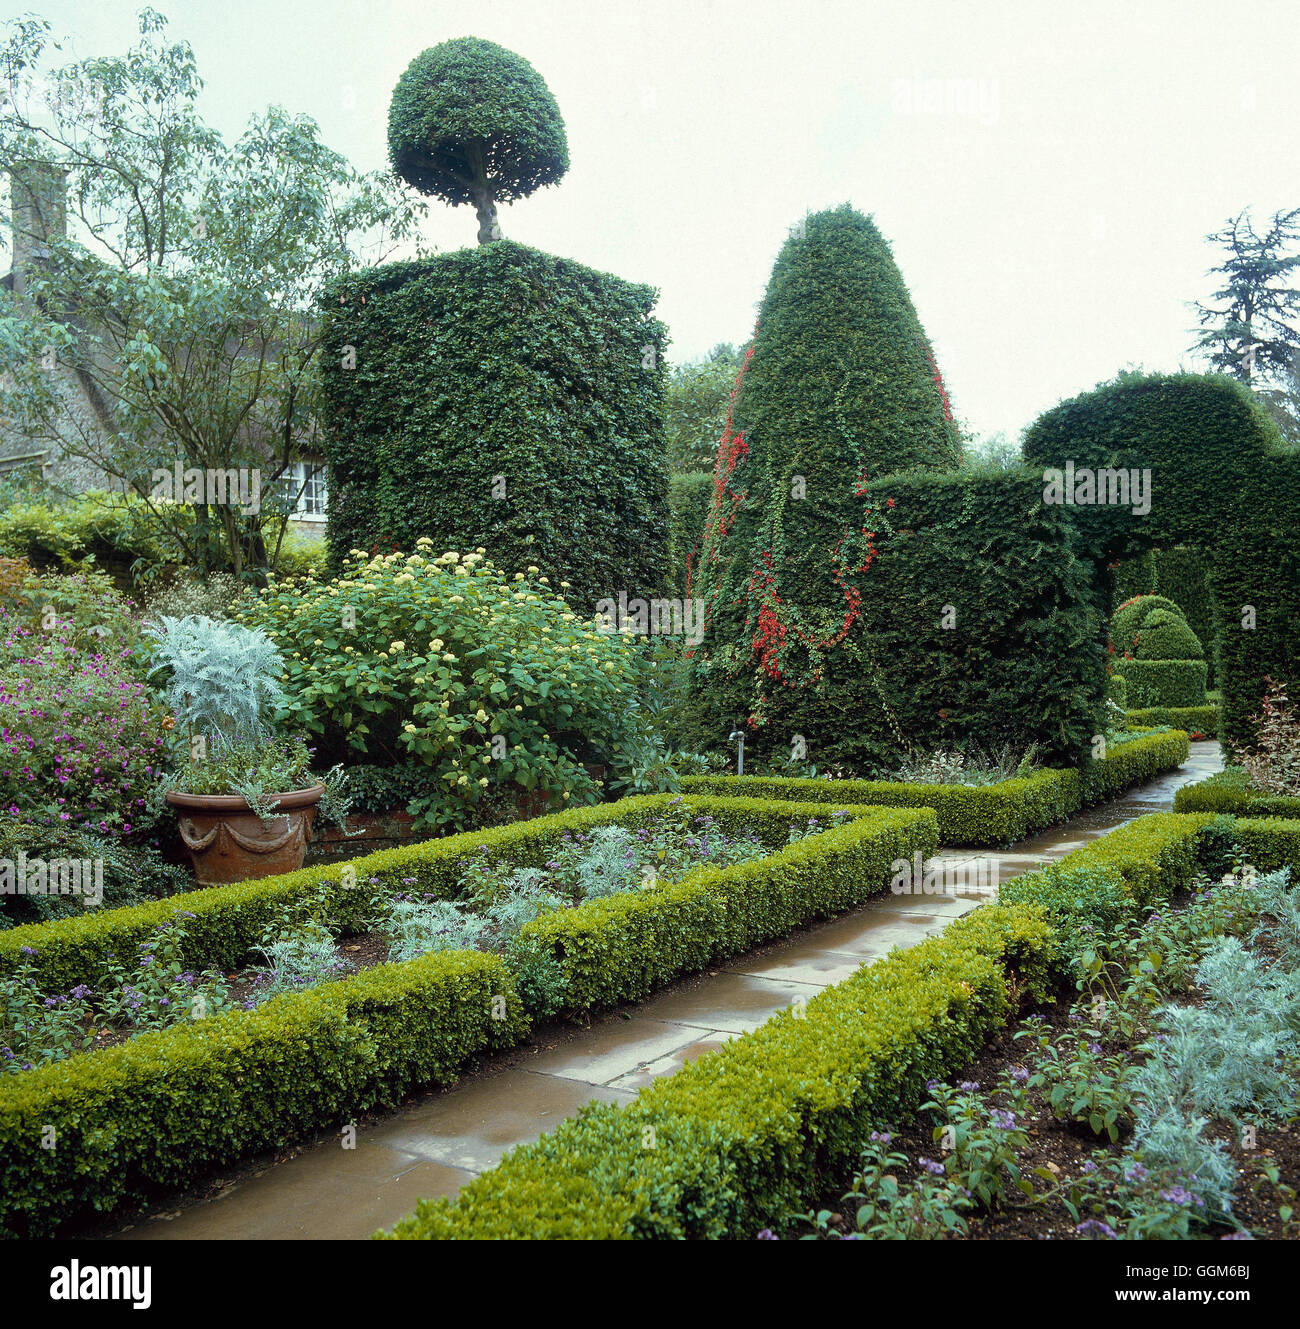 Topiary - and box hedging - (Please credit: Photos Horticultural Hidcote Manor Gardens N.T.)   TOP012195  Compulsory Stock Photo